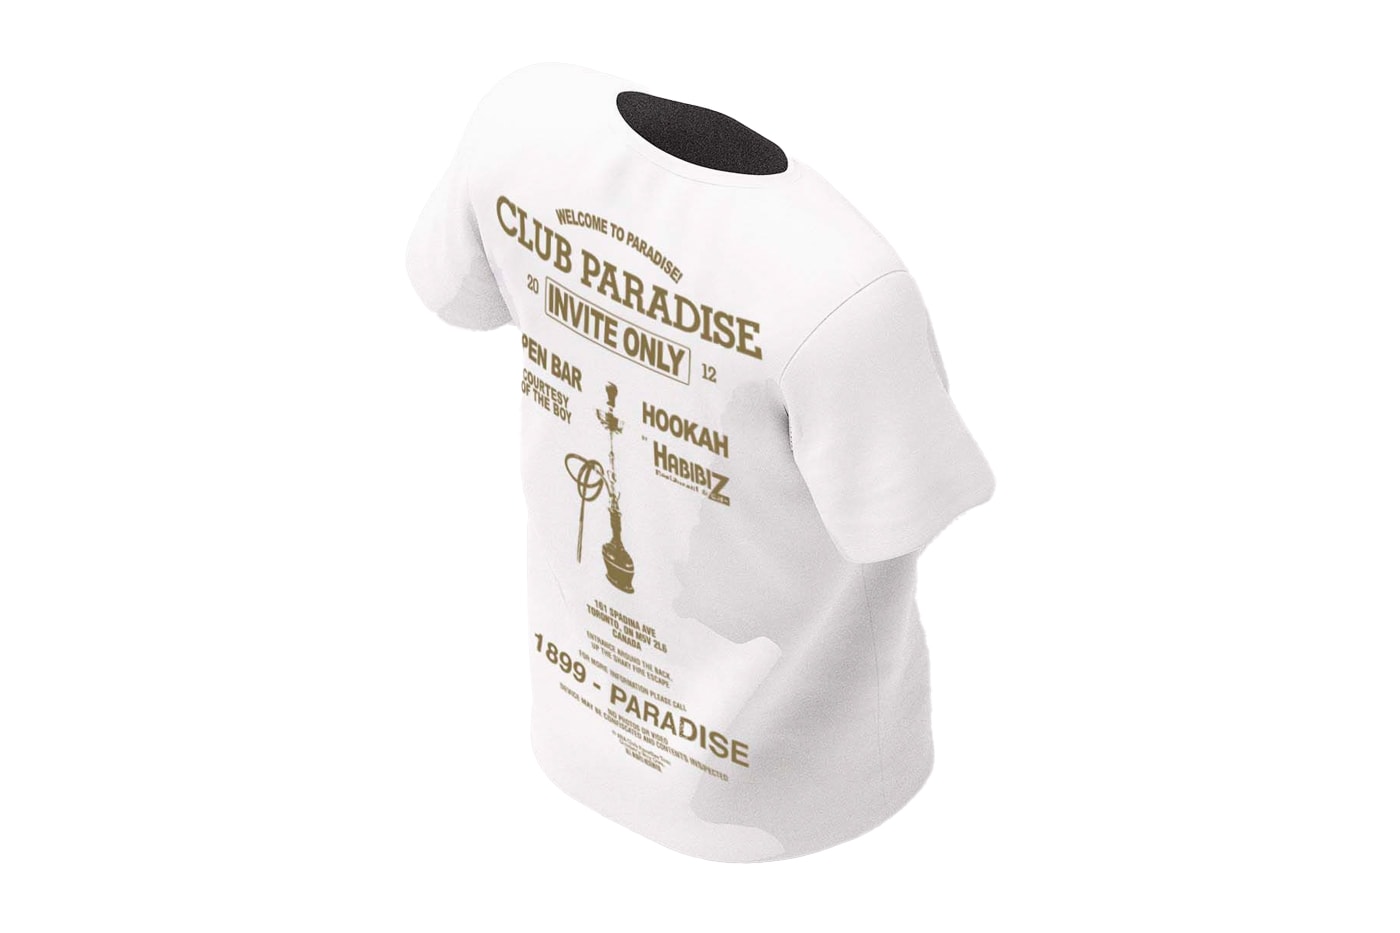 DrakeRelated Take Care 10 Year Anniversary Marvin's Room Club Paradise T-Shirts Release